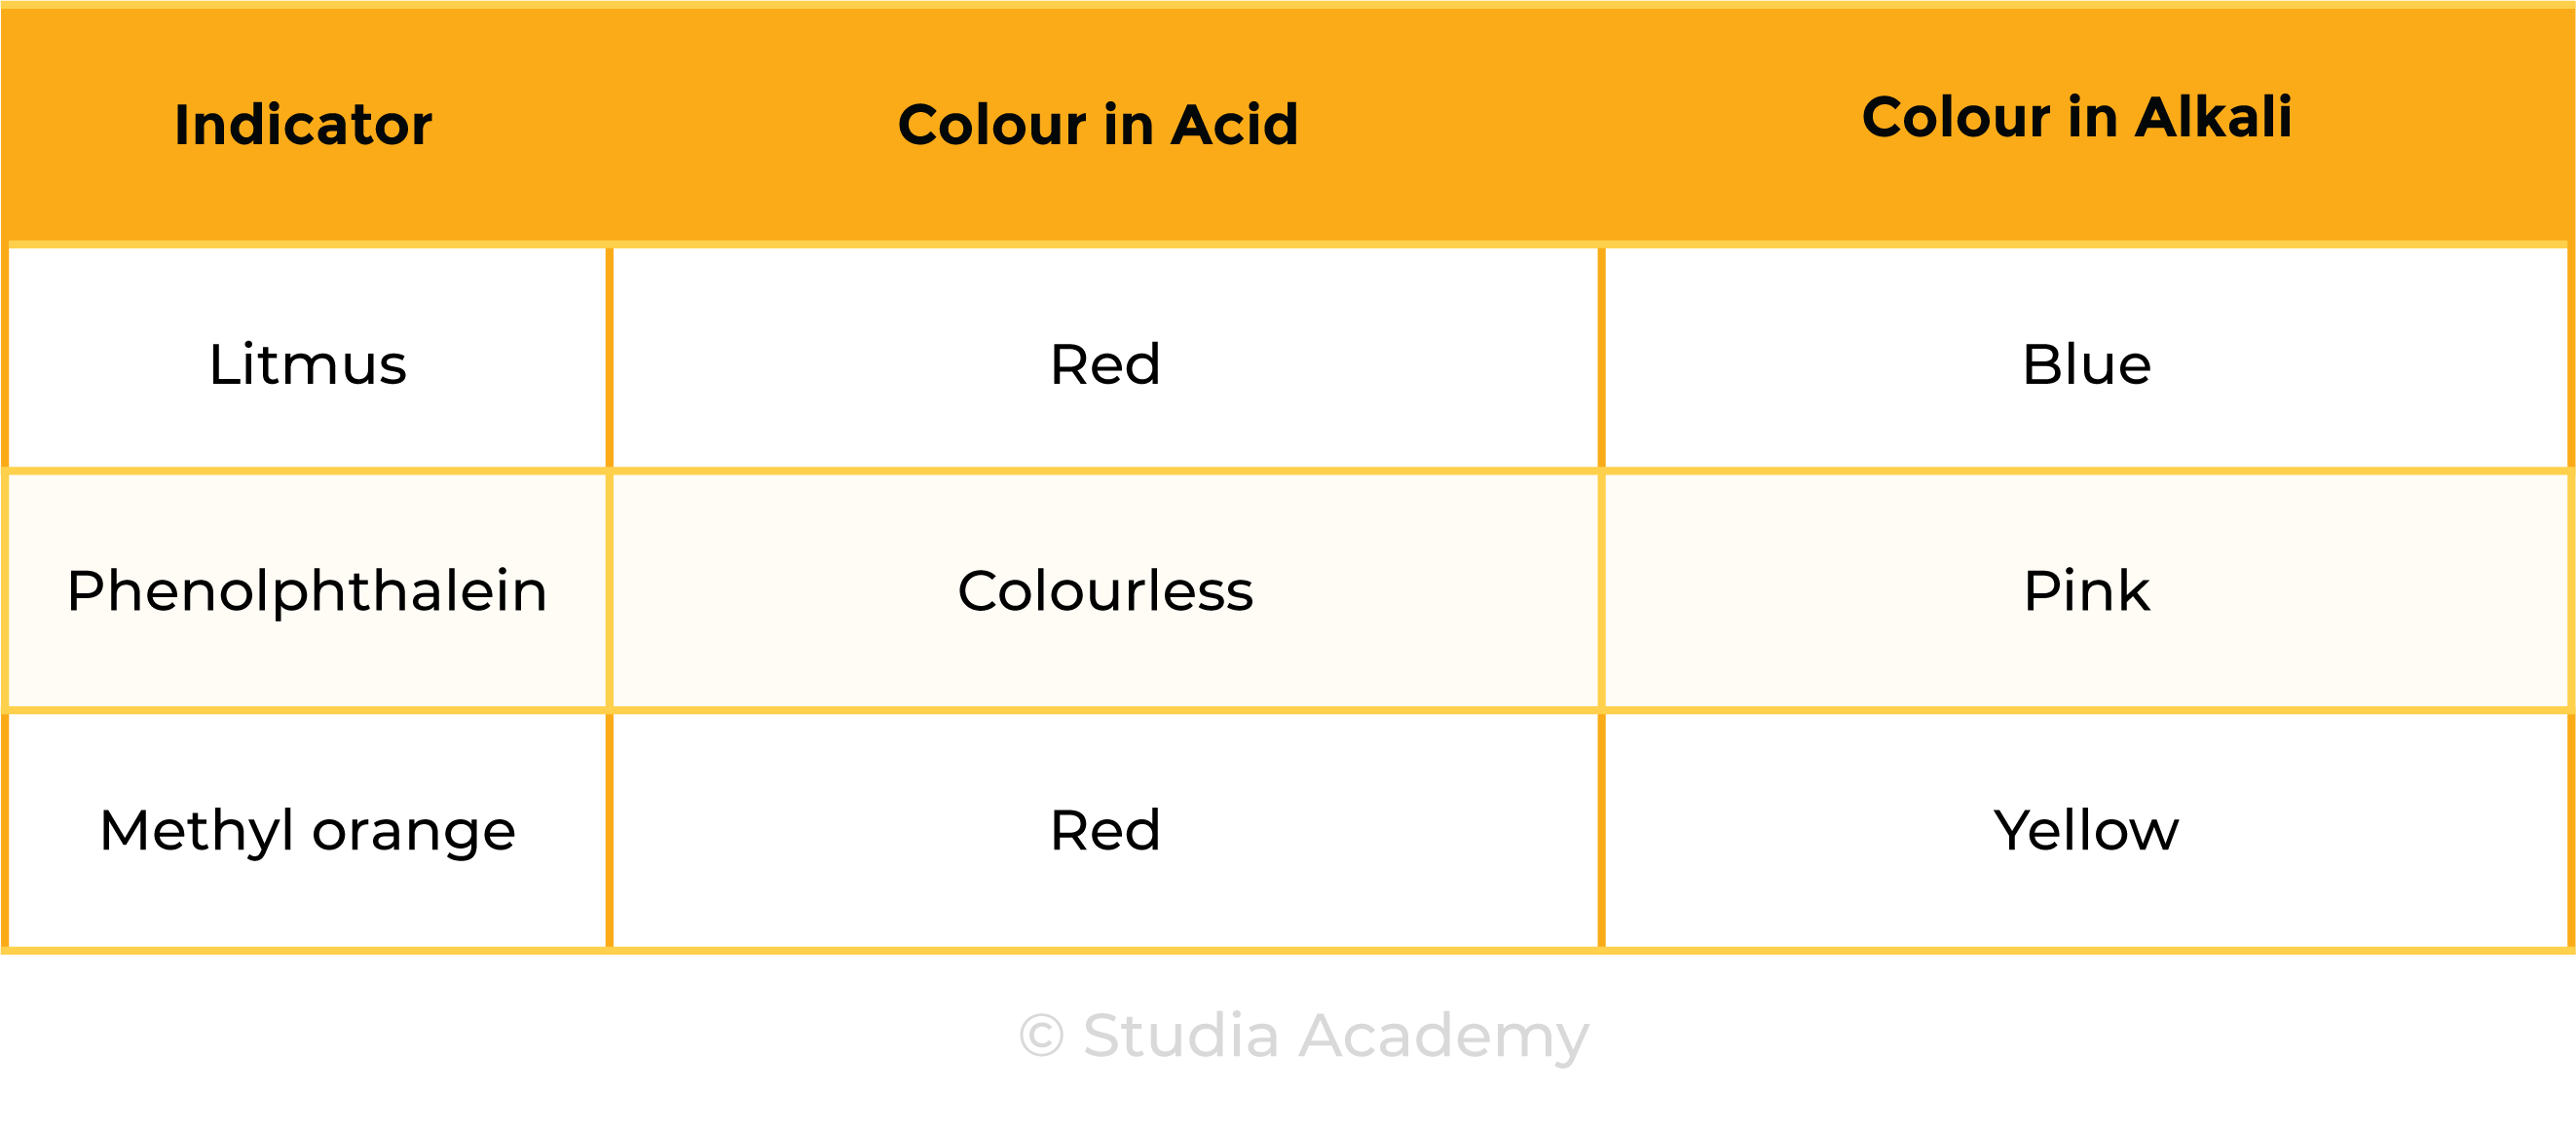 edexcel_igcse_chemistry_topic 15 tables_acids, alkalis, and titrations_001_methyl orange, phenolphthalein, litmus solution indicator colours